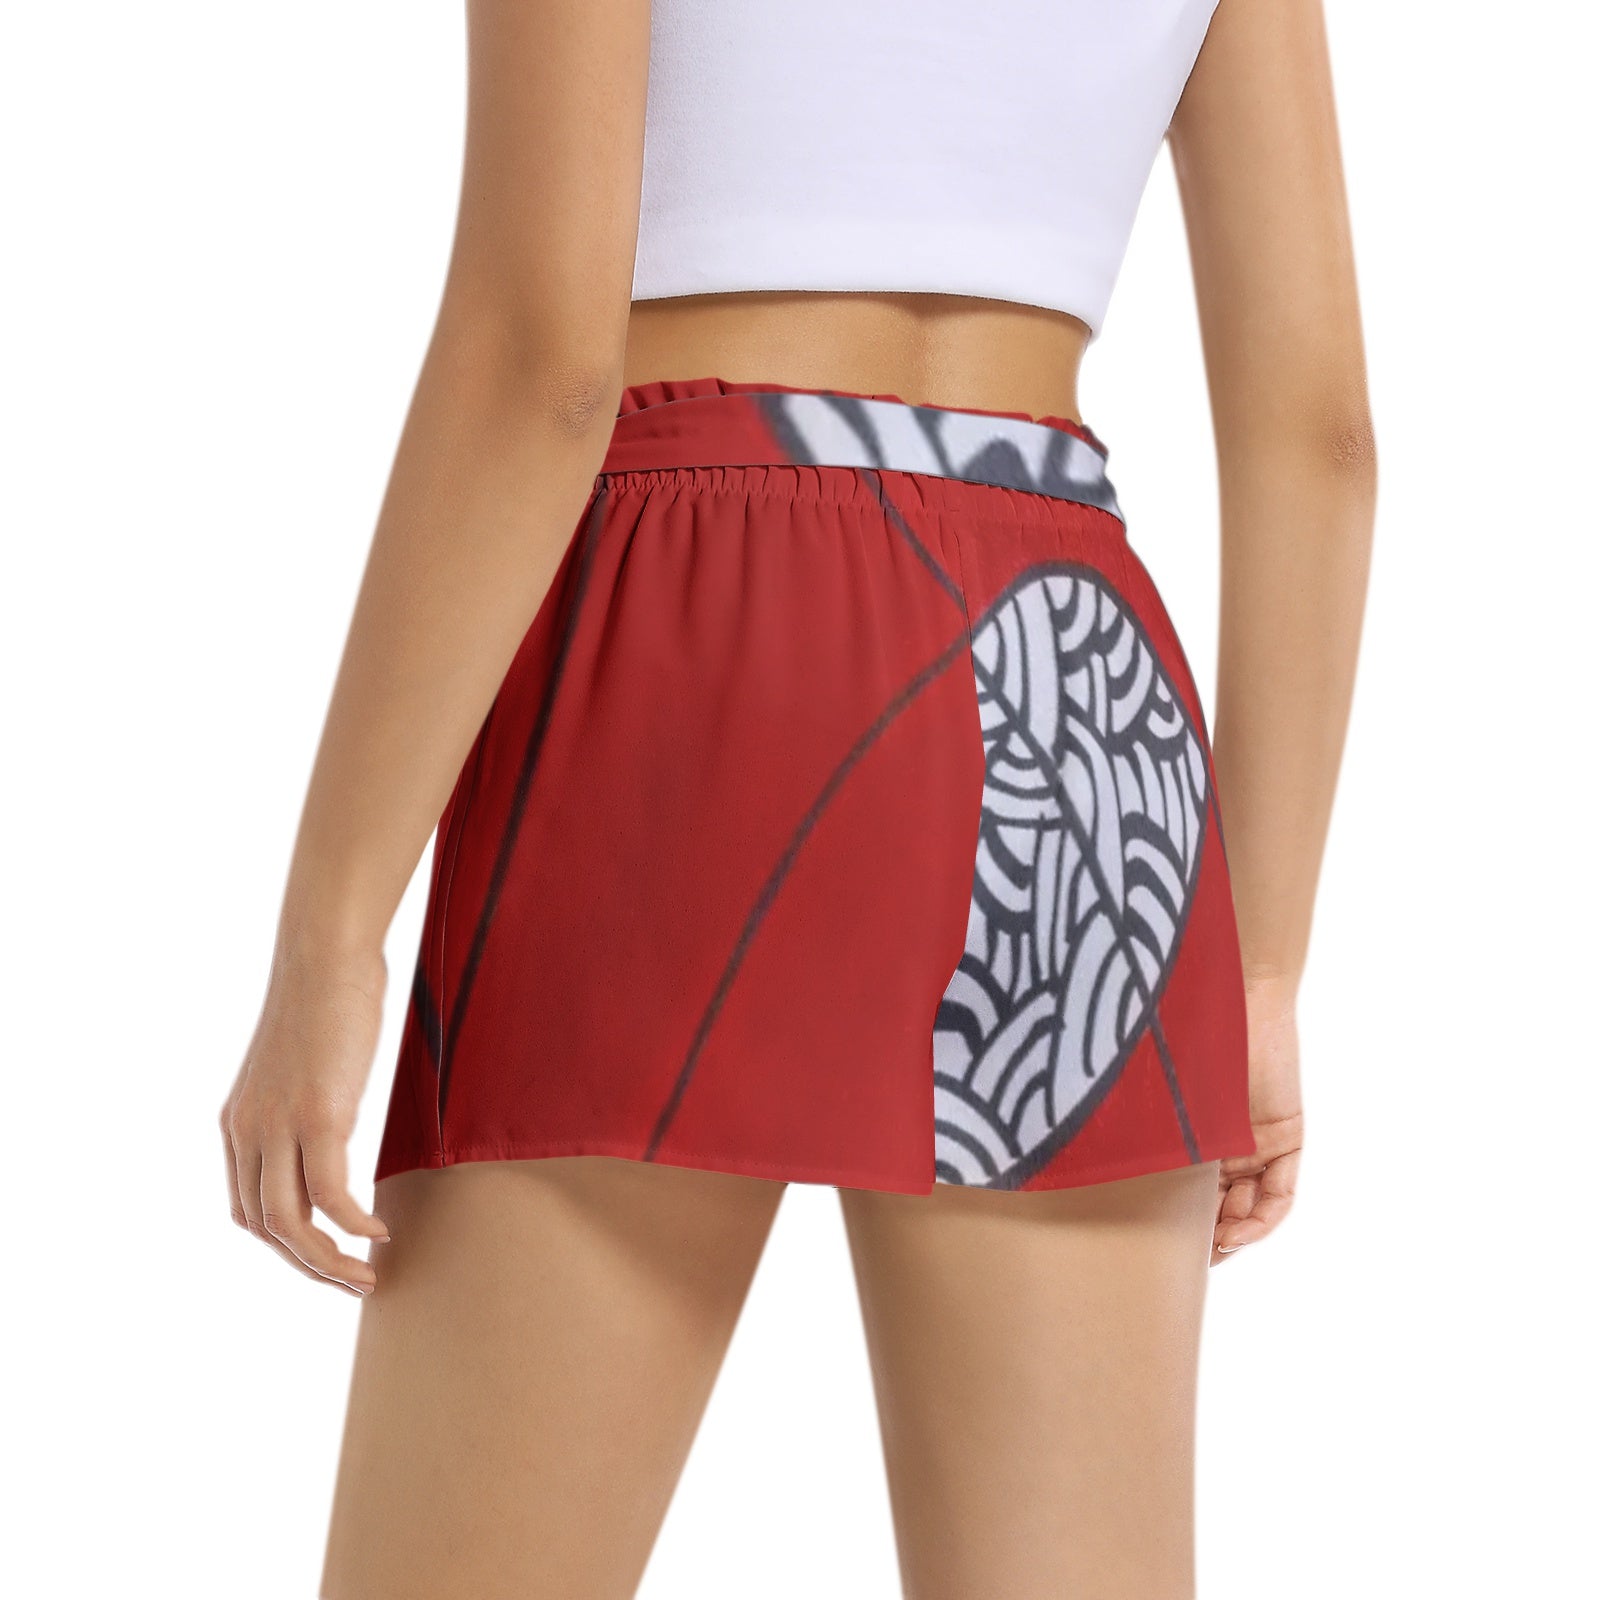 Abstract Women's Belted Short - O By Onica Online Store